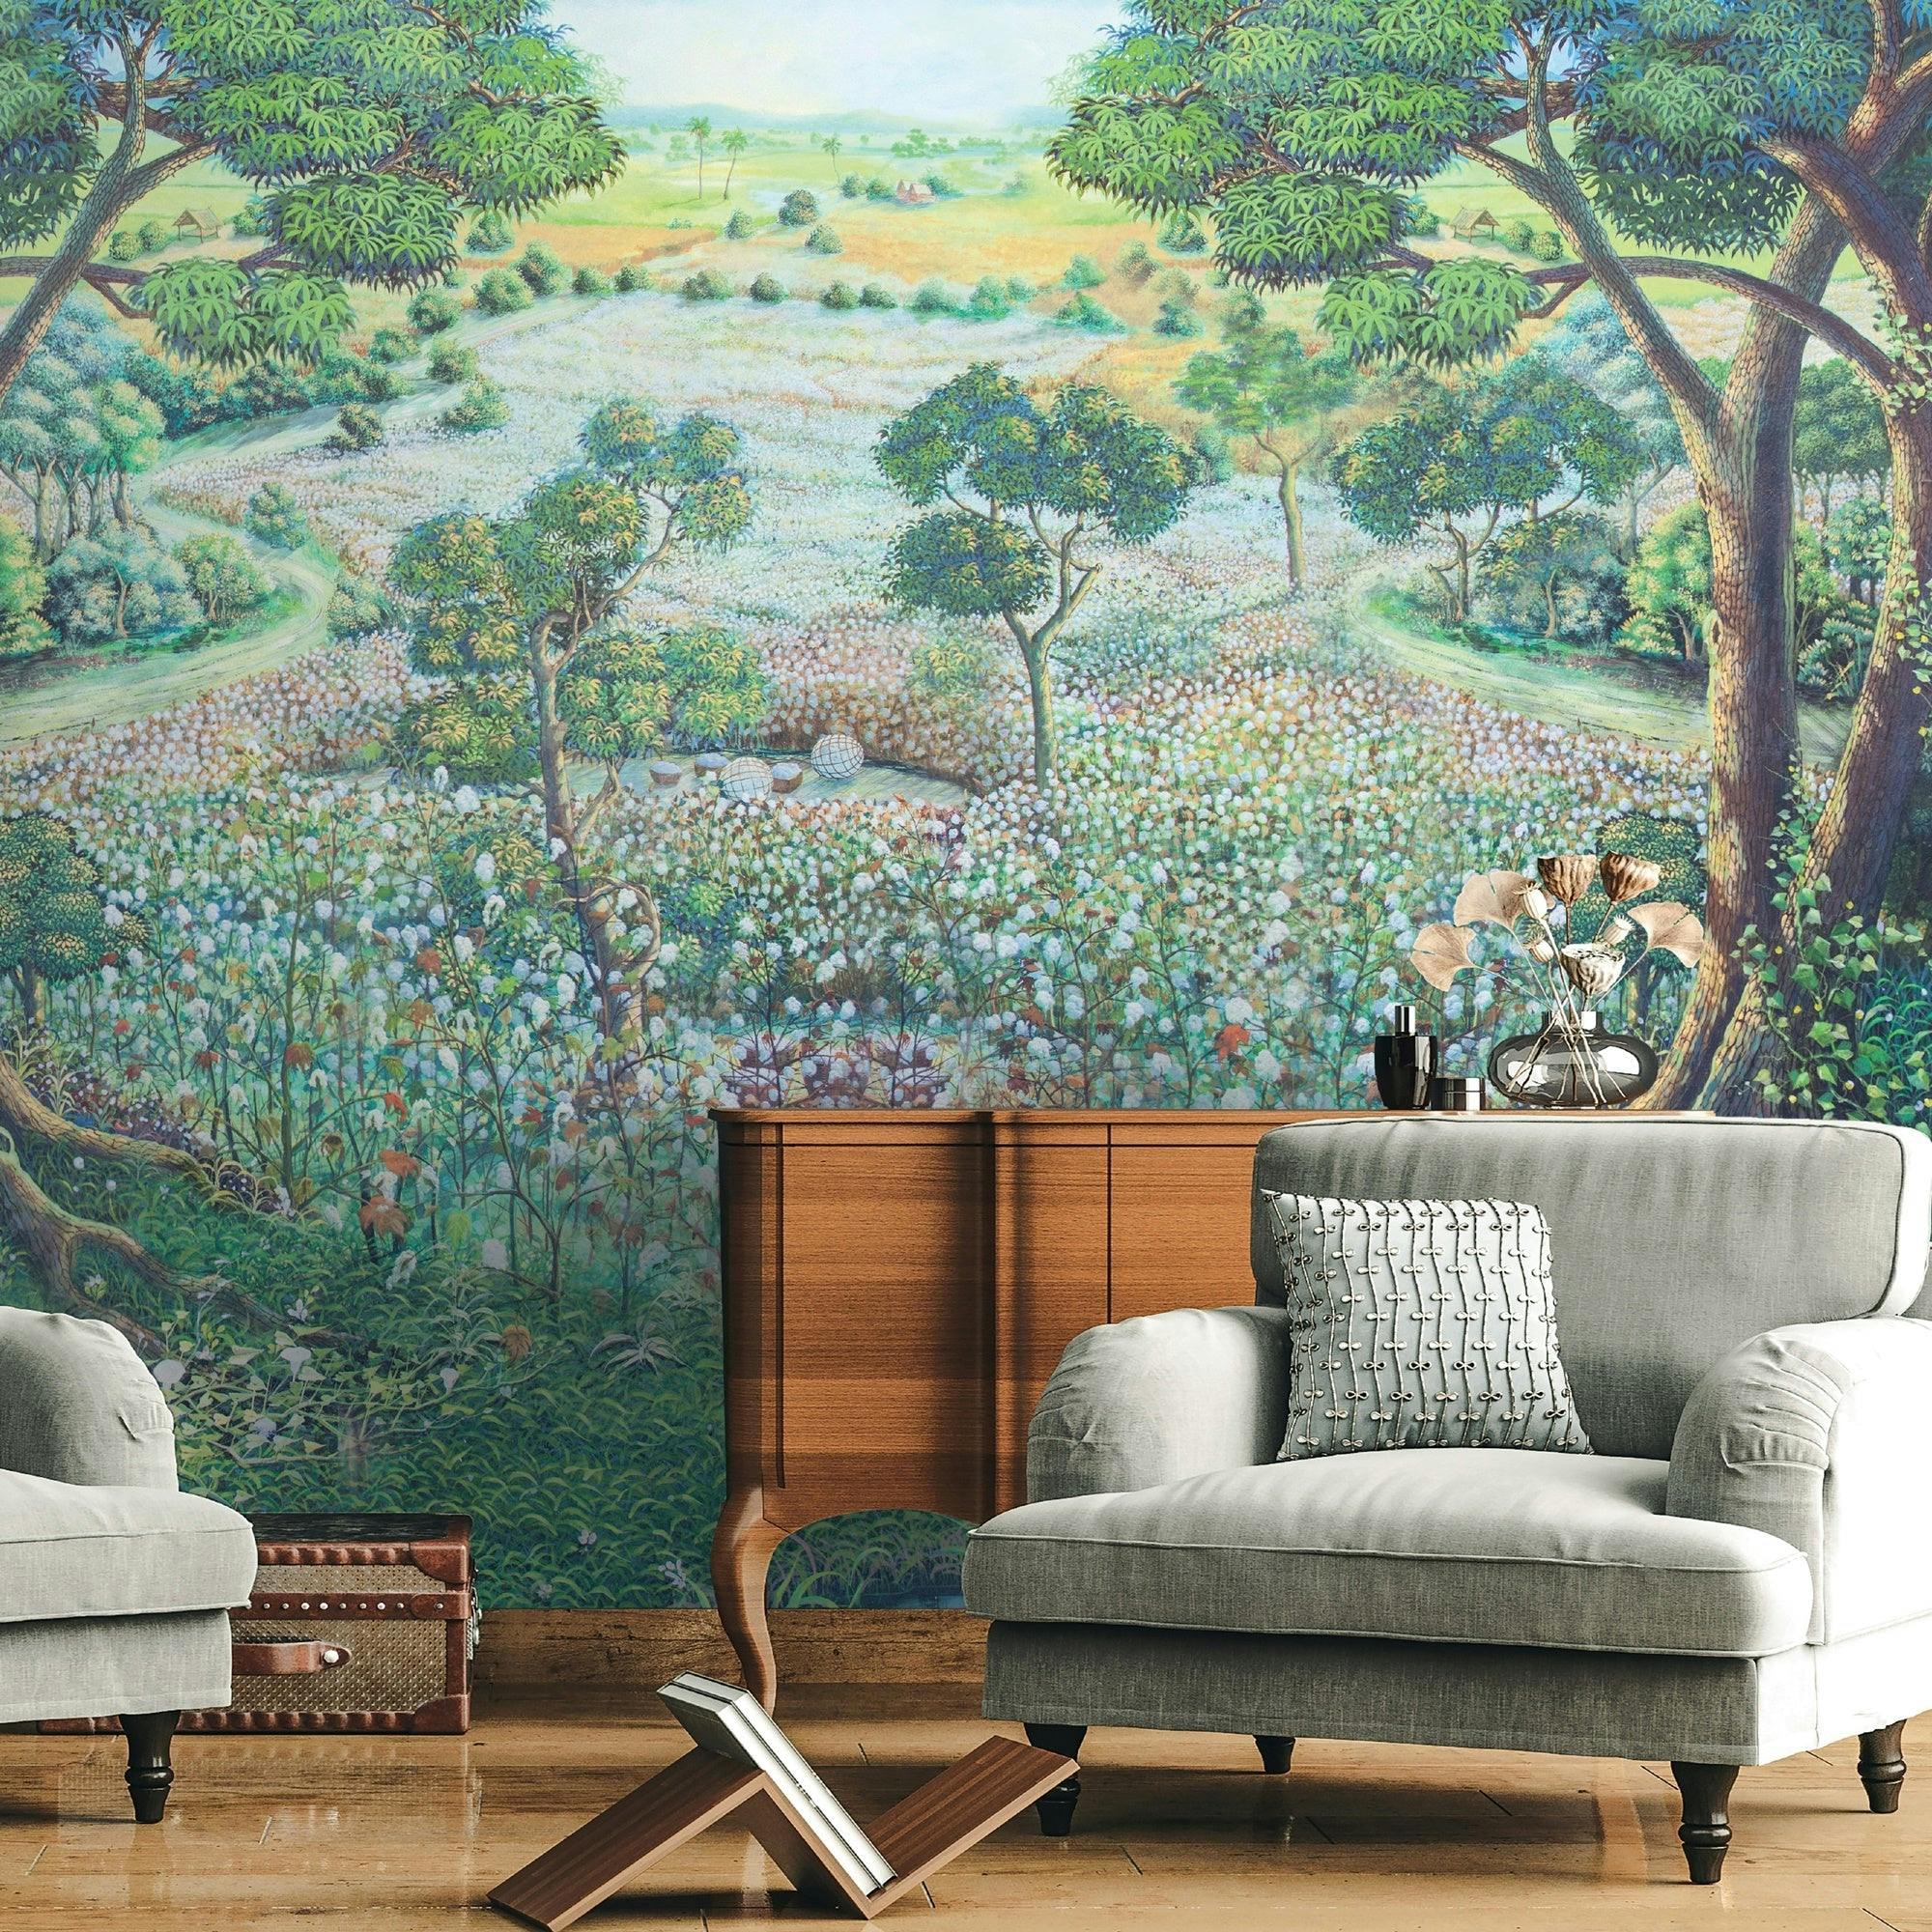 Fields of Nature Mural Wallcovering